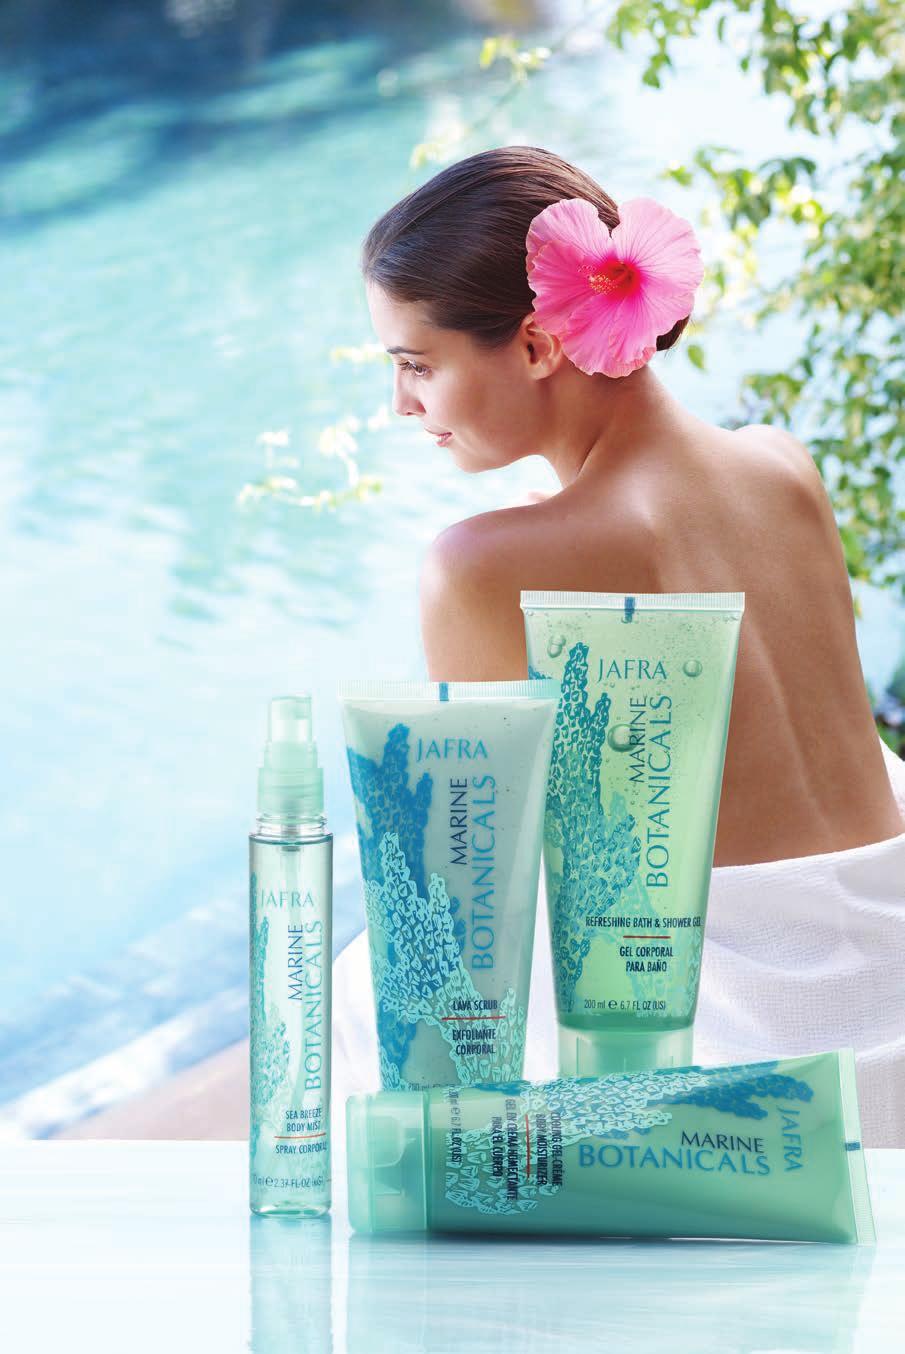 20% OFF MARINE BOTANICALS Find your escape Get the essentials Turn to JAFRA Deodorants for natural ingredients and targeted benefits. Sea Breeze Body Mist 2.37 fl. oz. $14 20597 Lava Scrub 6.